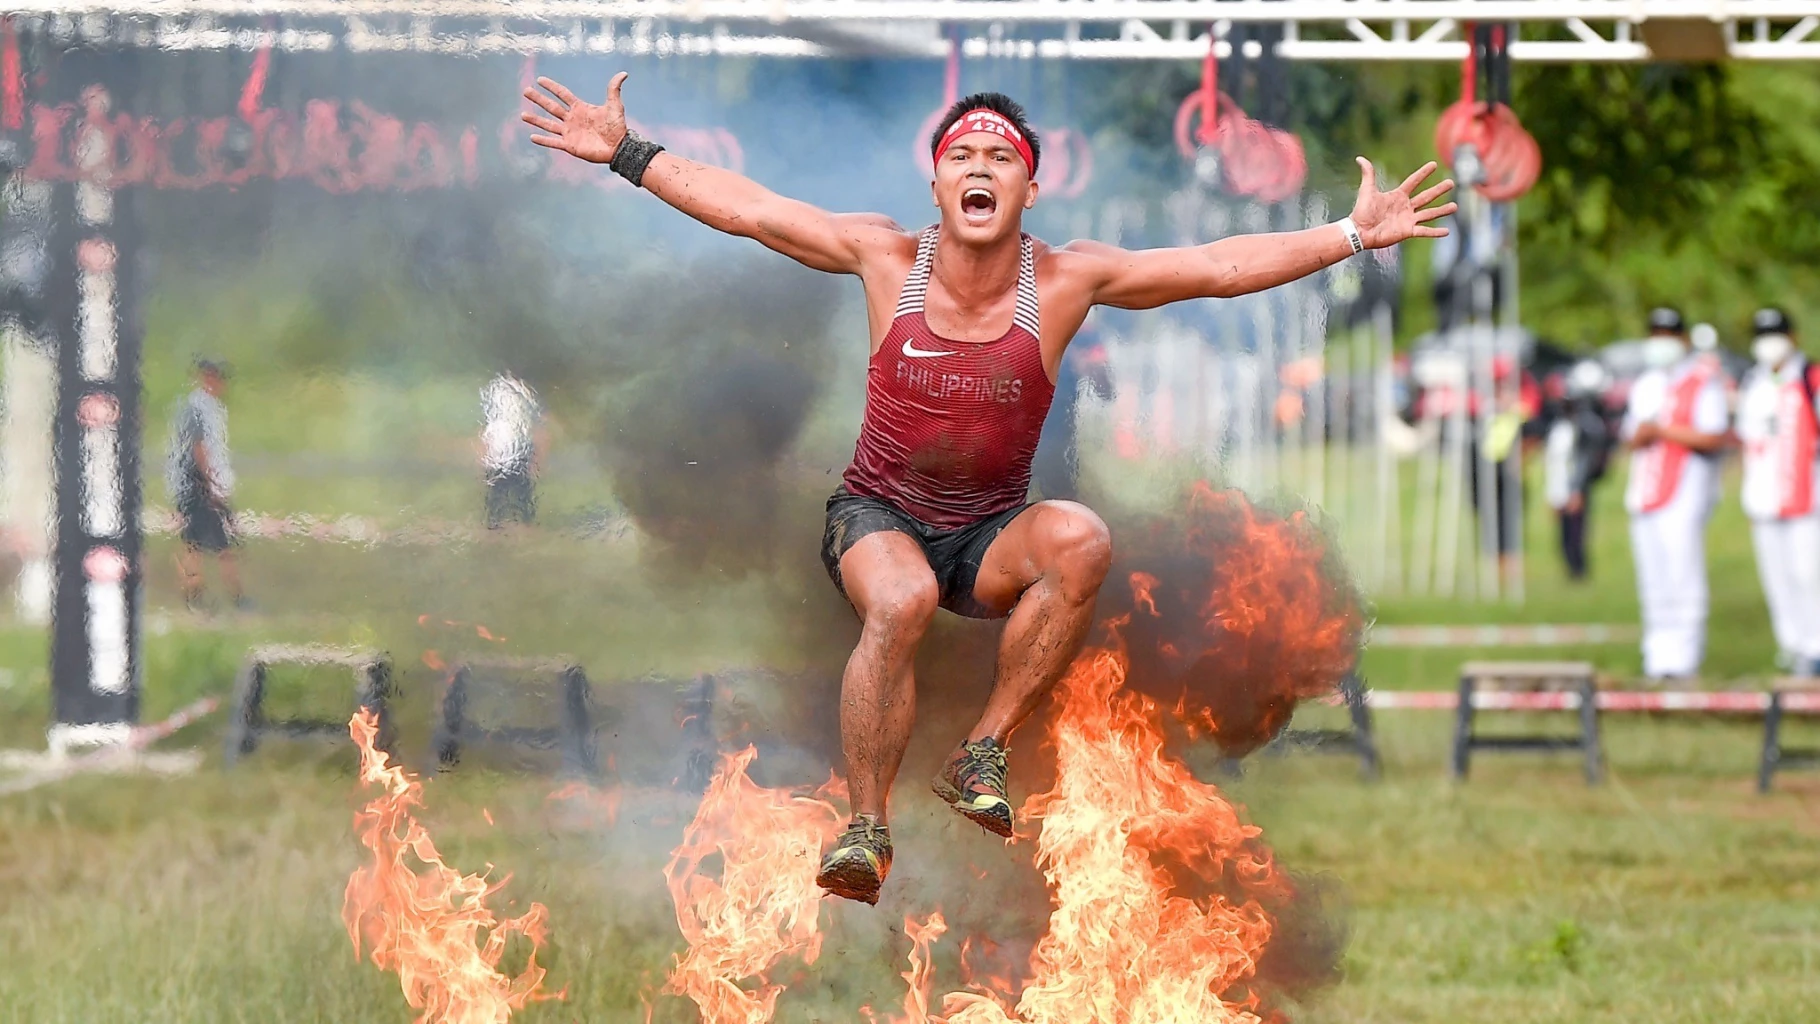 Phuket fitness competitions 2023 - Spartan Race In Phuket Thailand - Maximum Fitness Patong